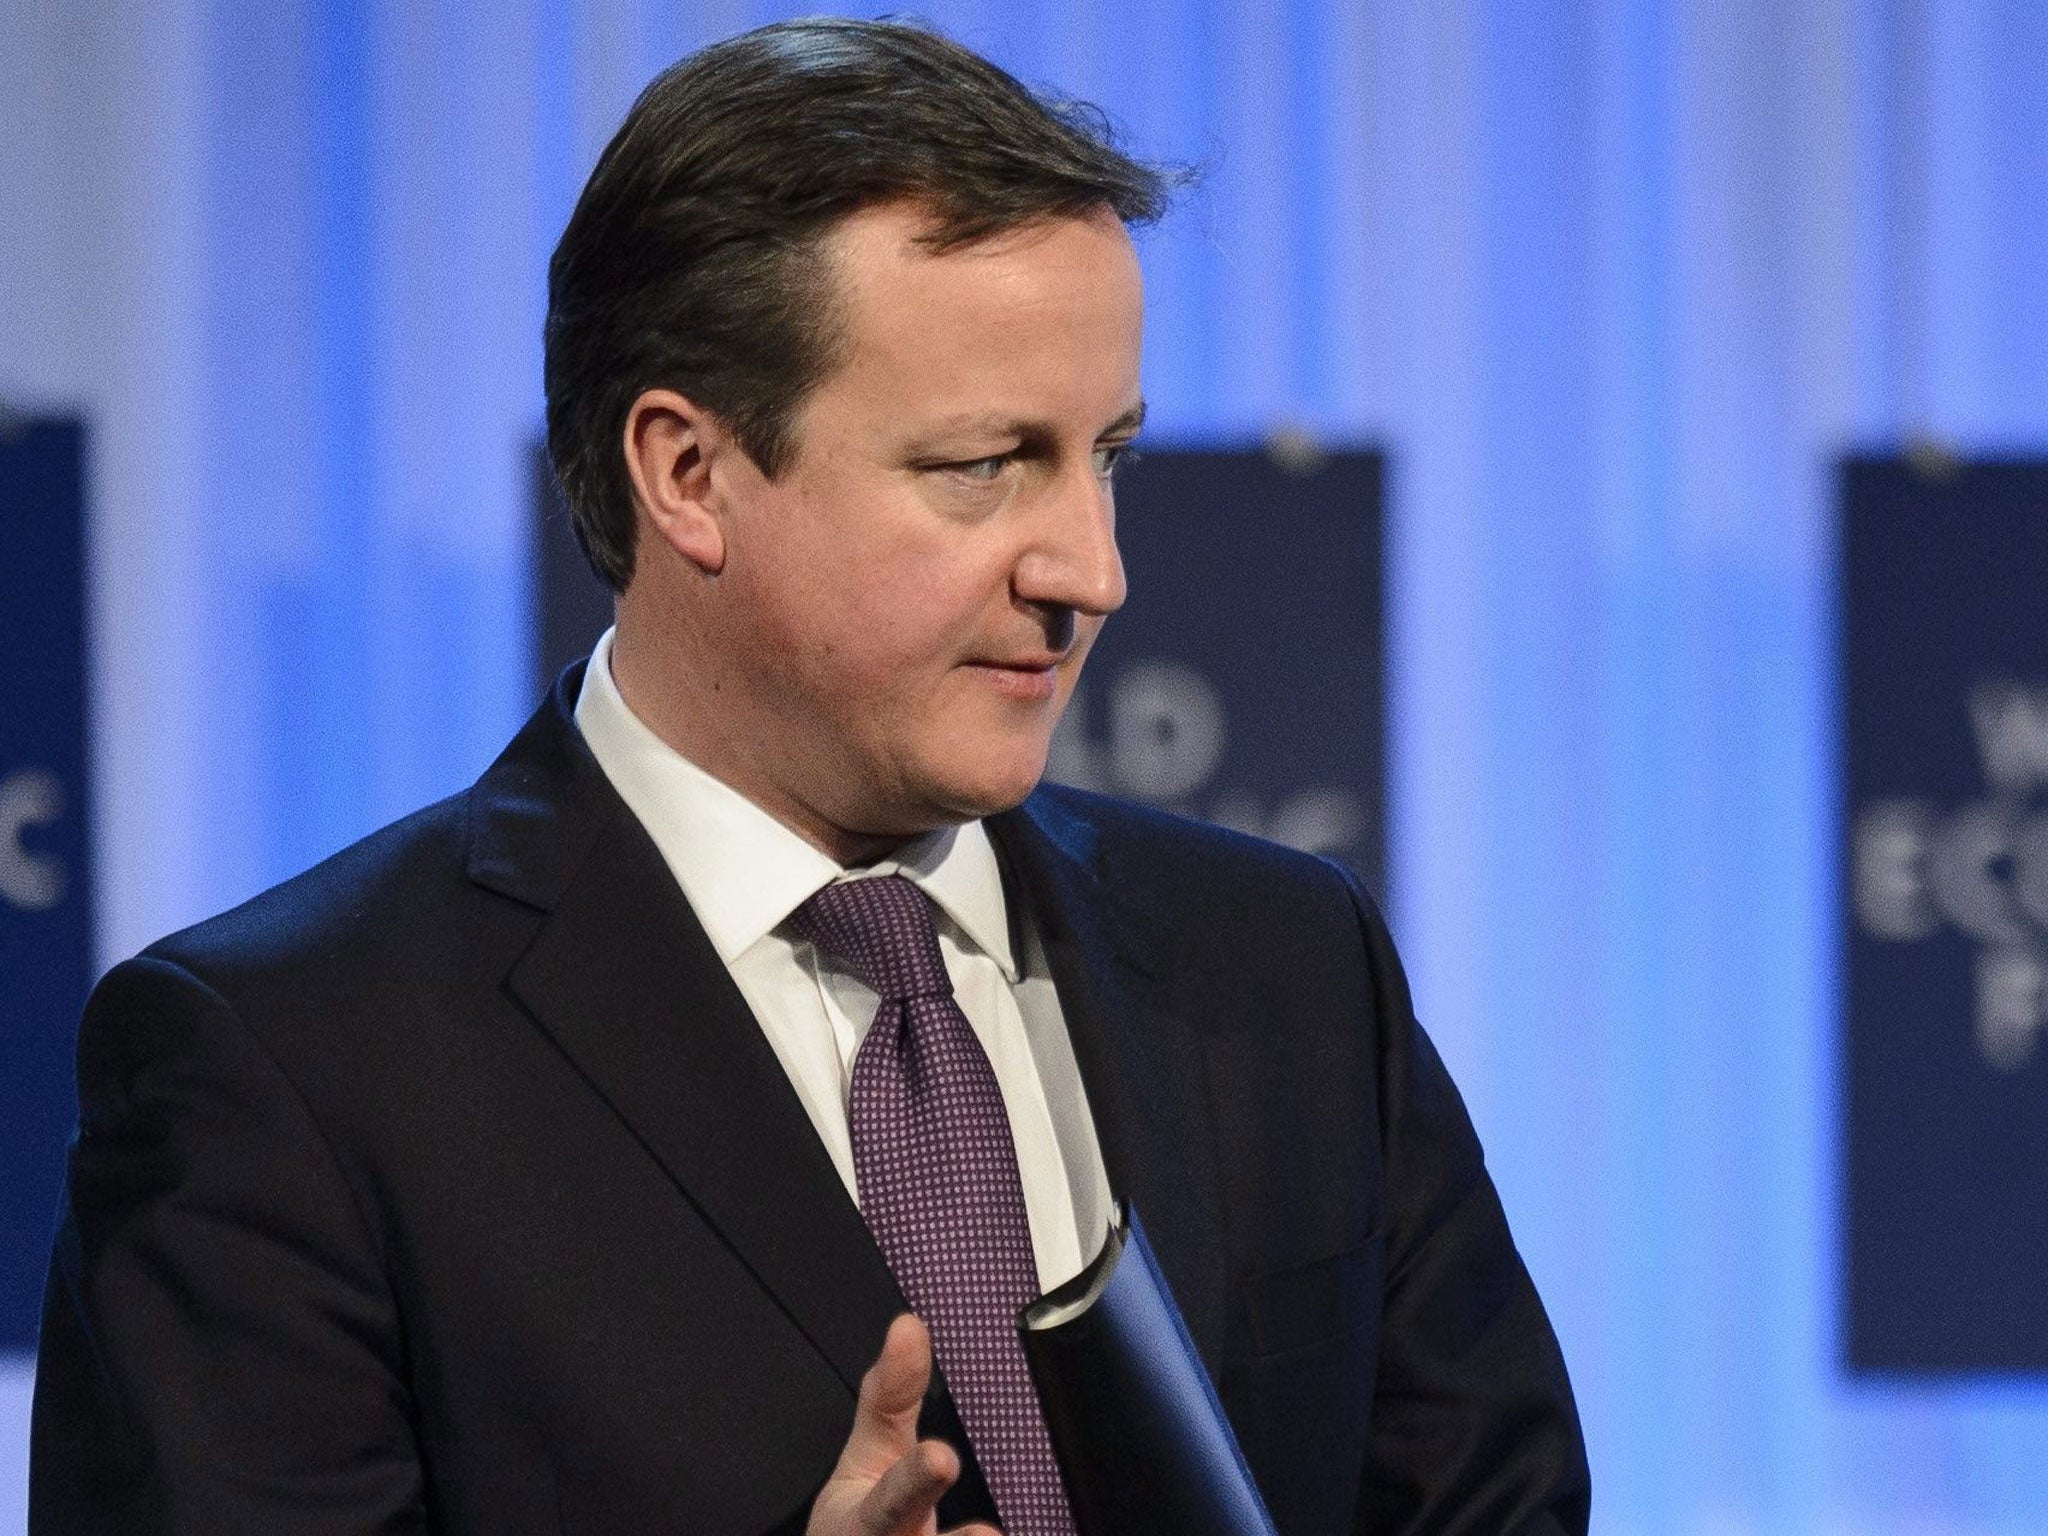 Cameron has told fellow Cabinet members that they would be bound by the rules of collective responsibility